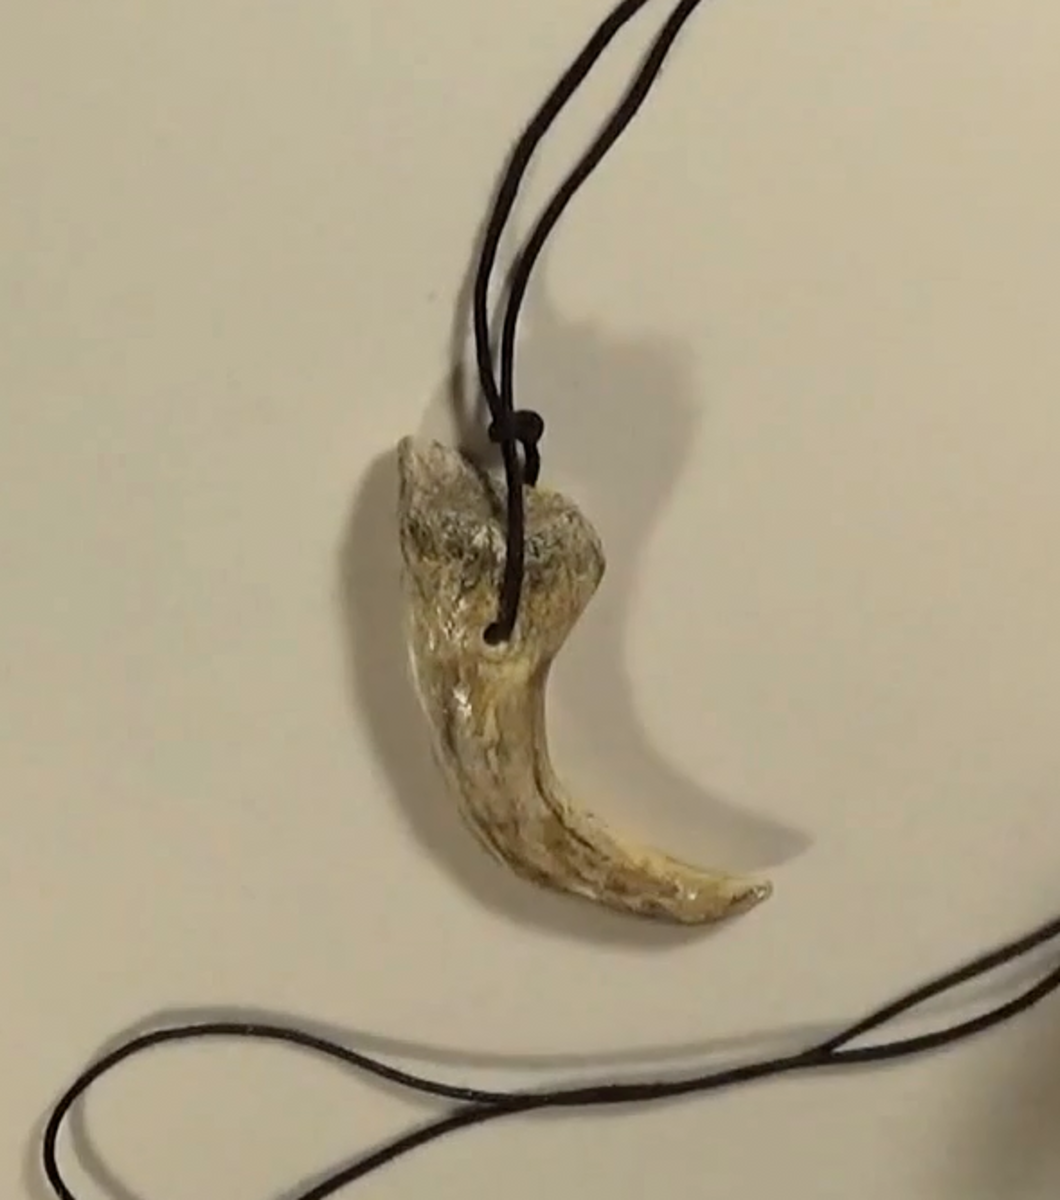 Velociraptor Claw Fossil Necklace Using Air Dry Clay